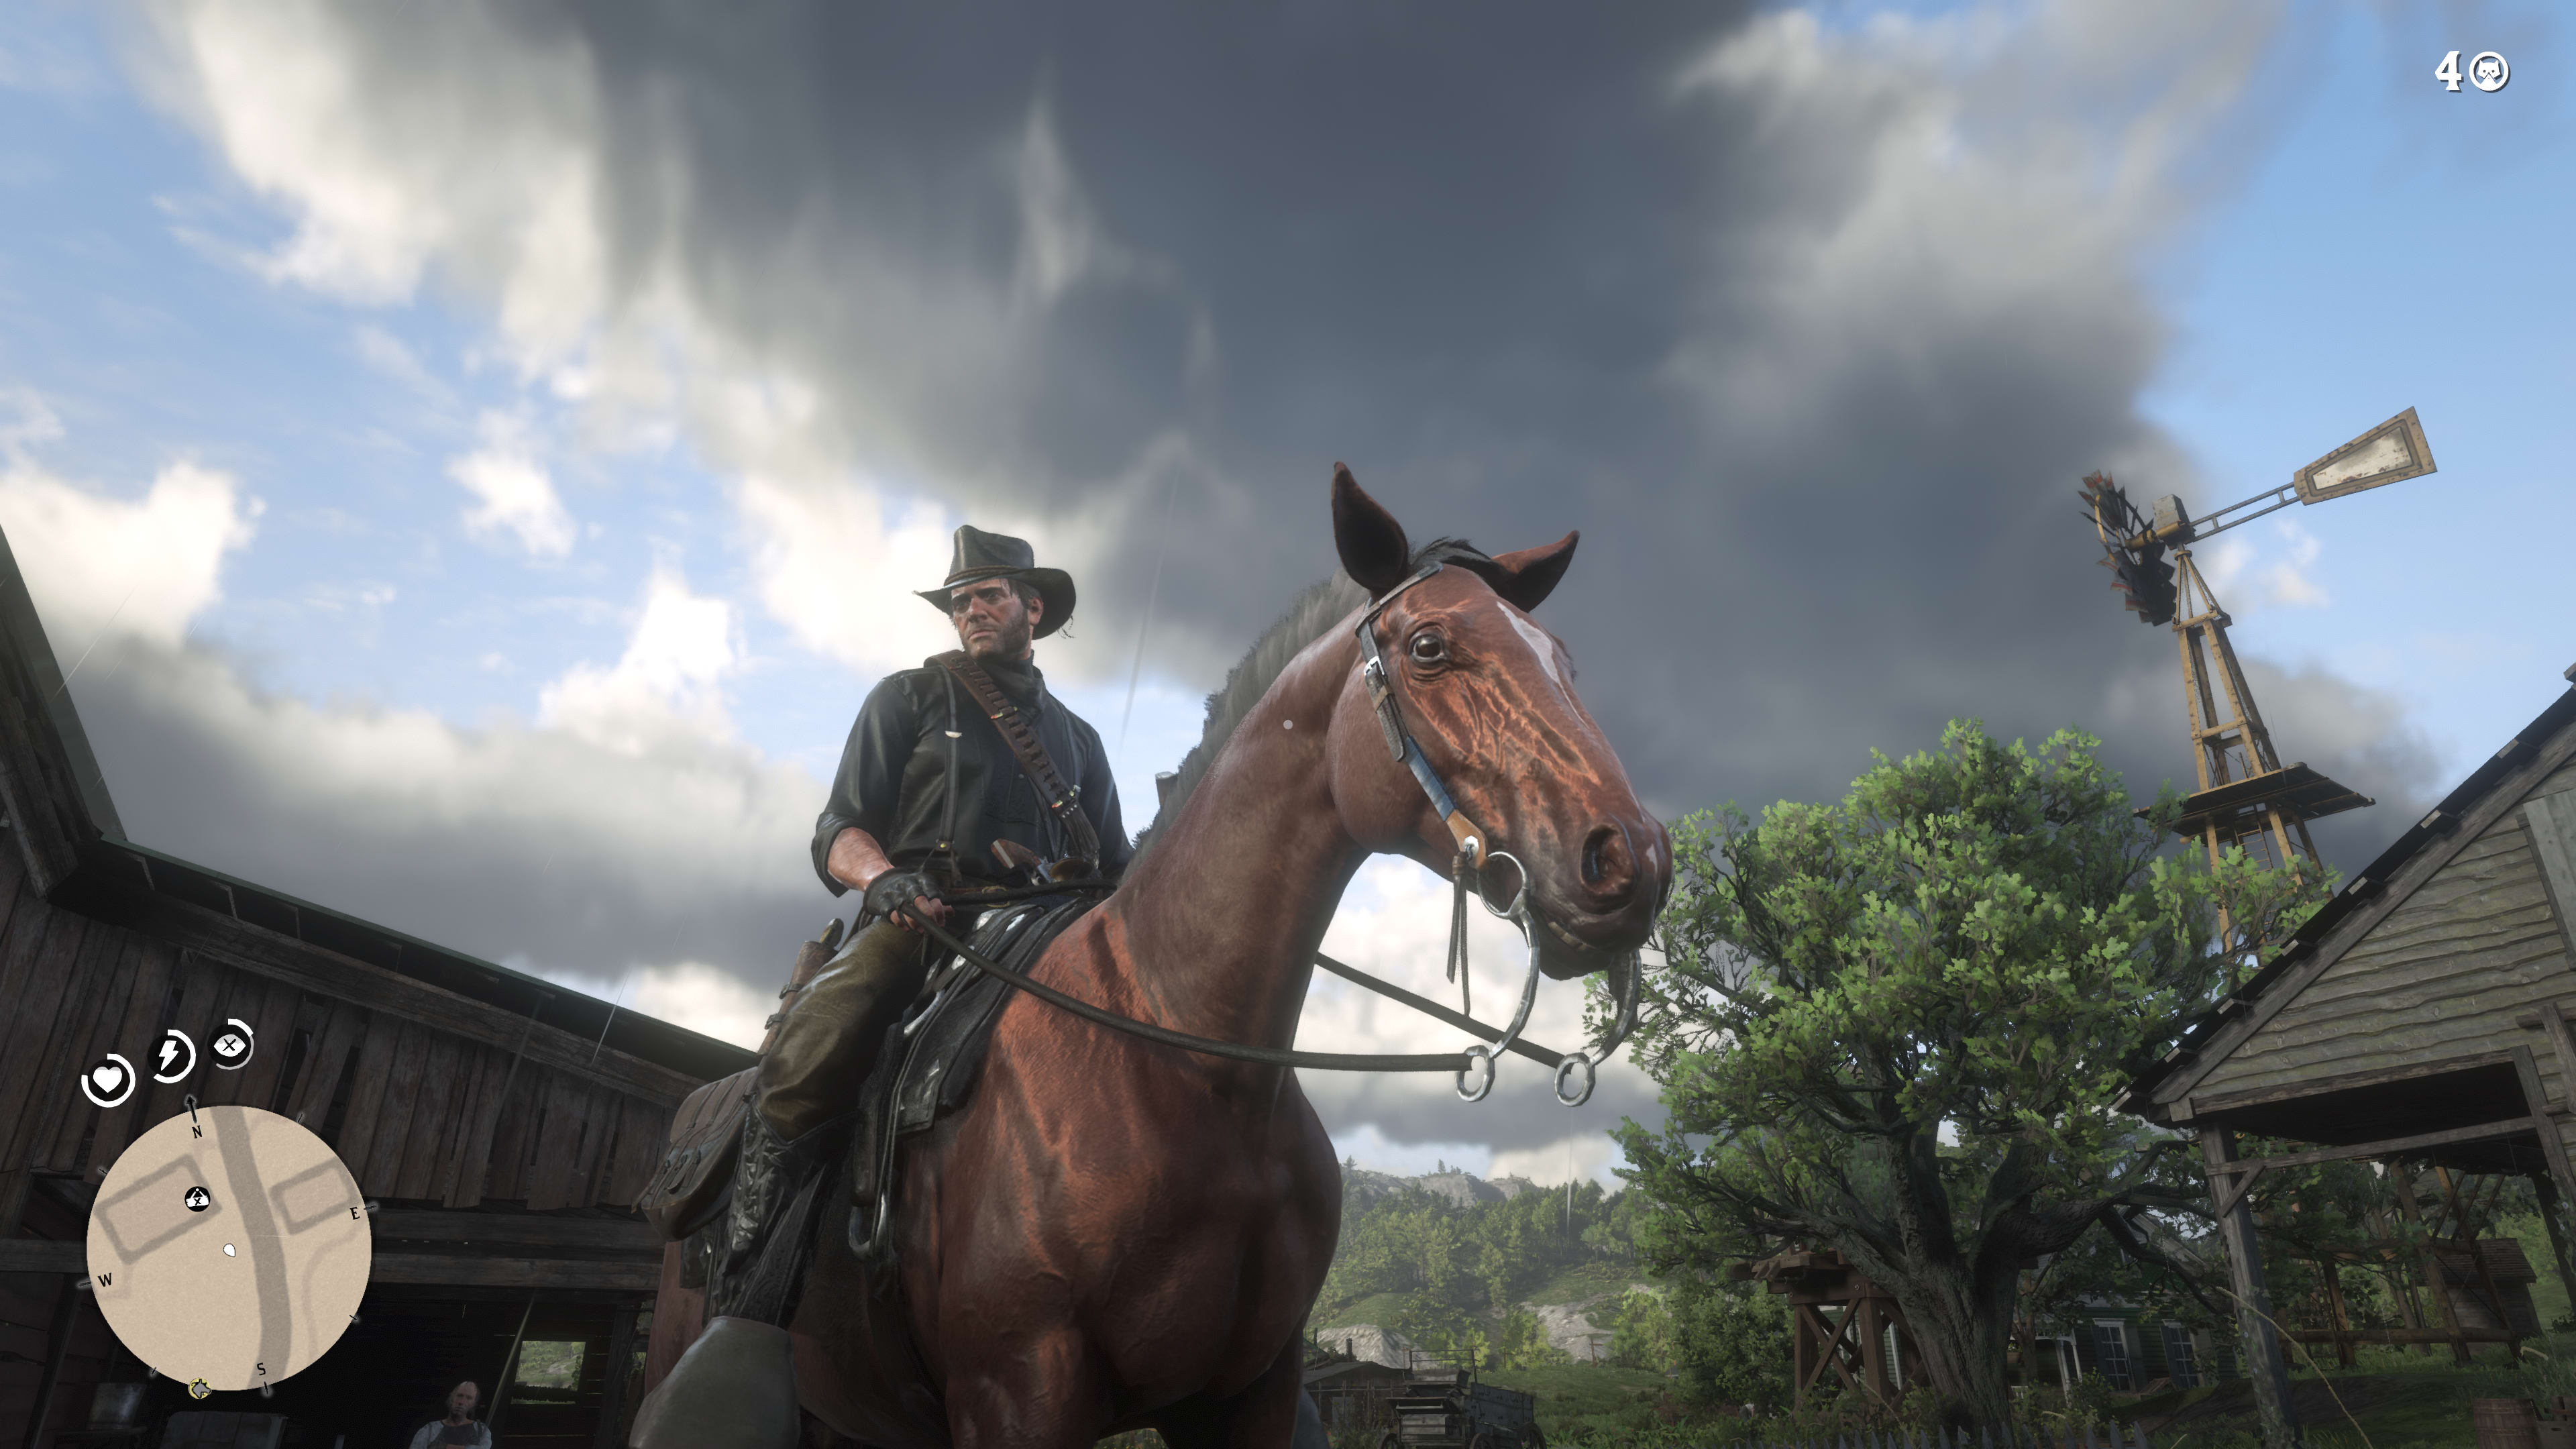 What Made Red Dead Redemption A BIG DEAL? 